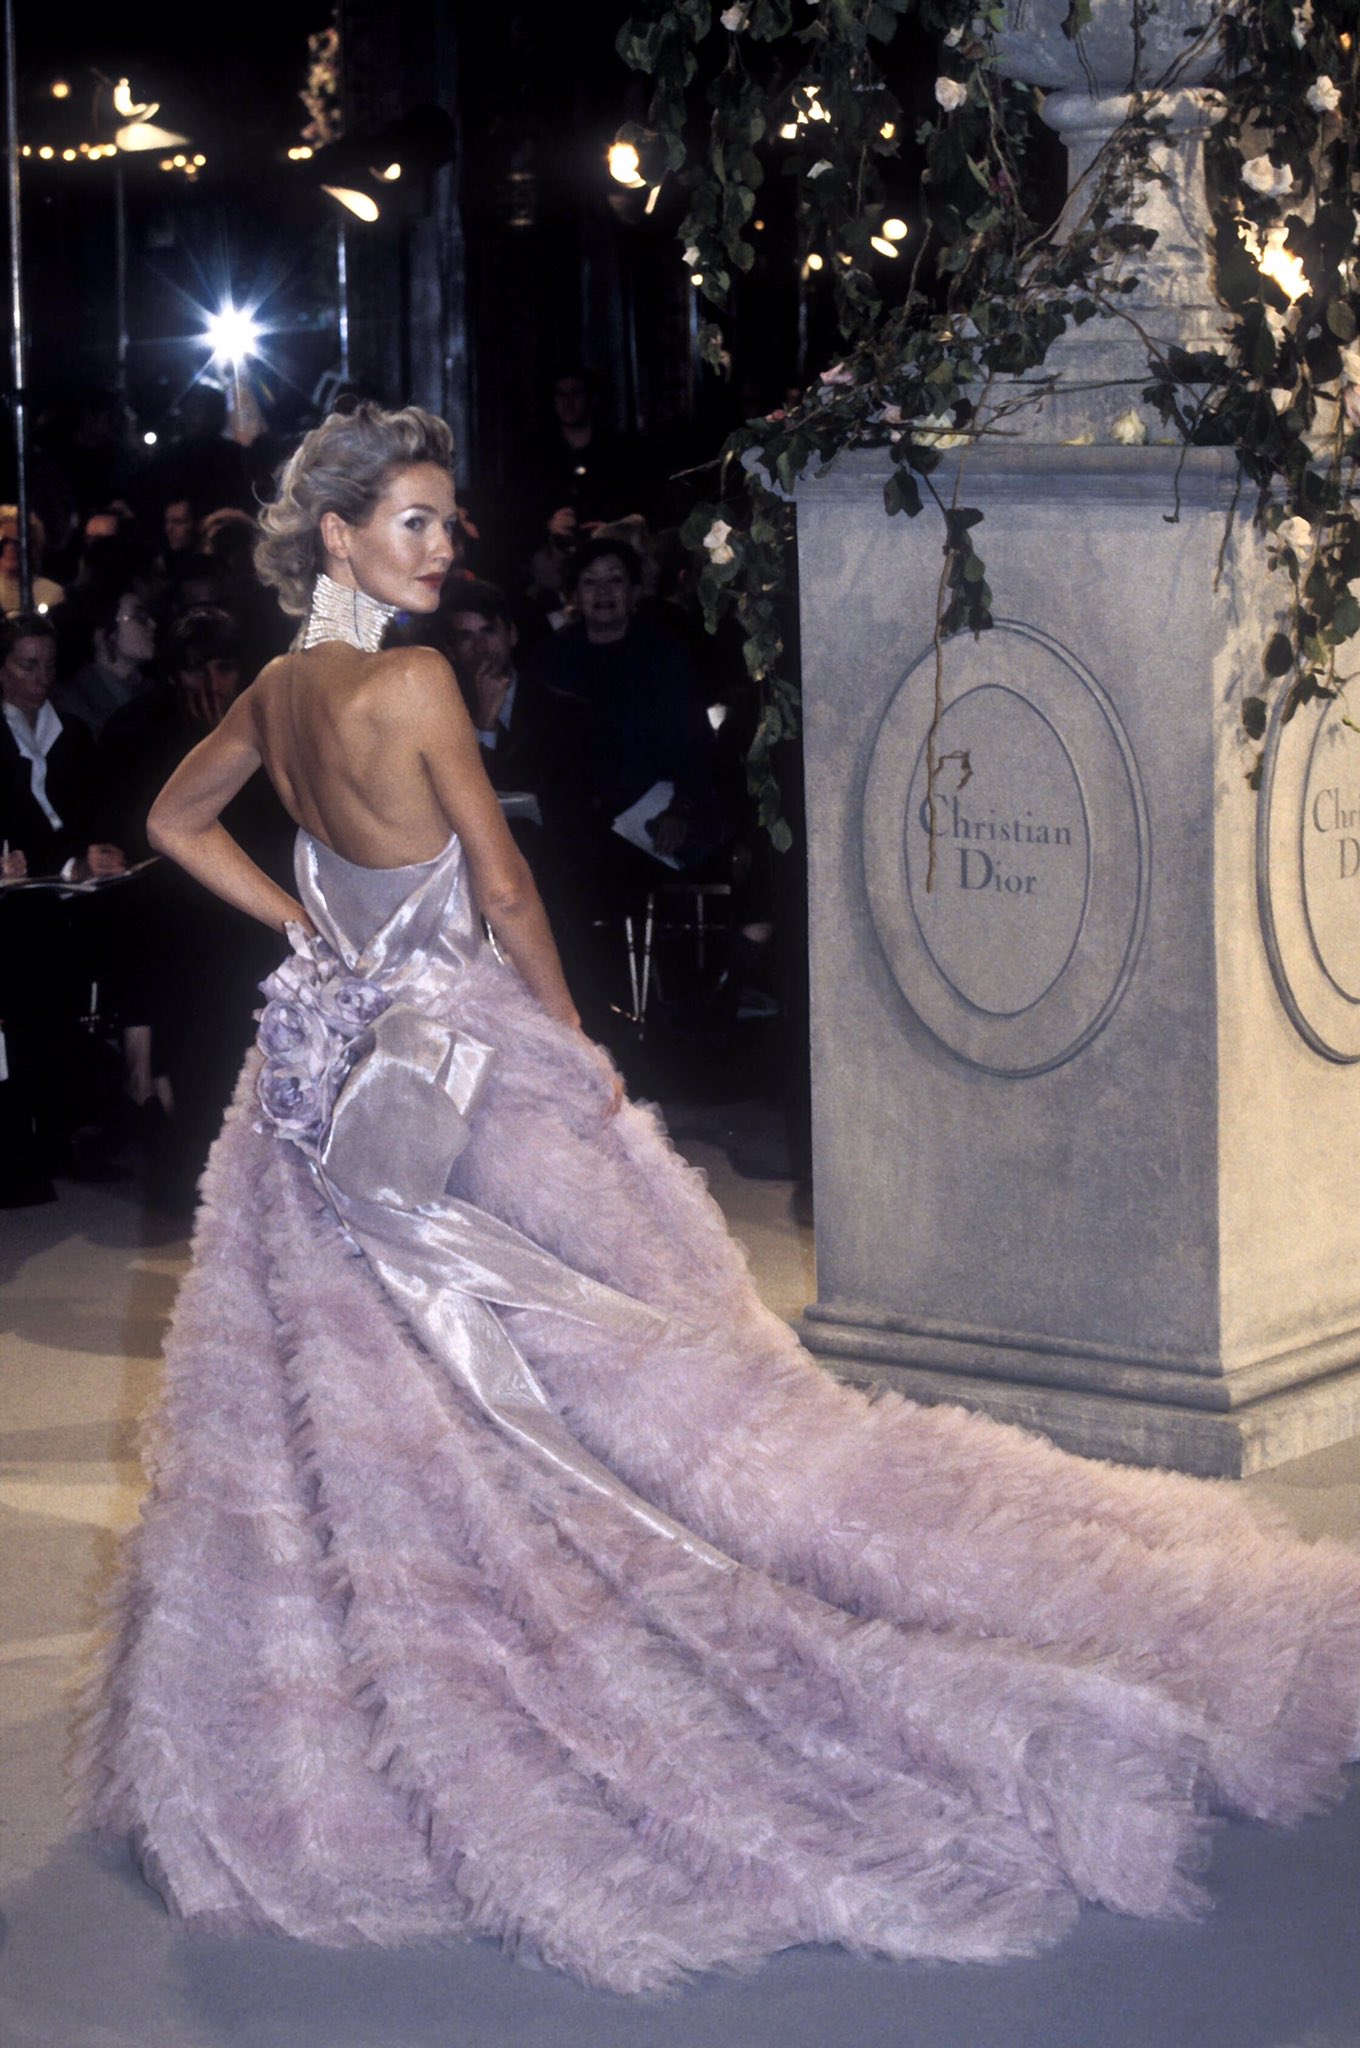 Nathan on X: christian dior haute couture 'maasai' s/s 1997, john  galliano's grand debut collection for the house  / X